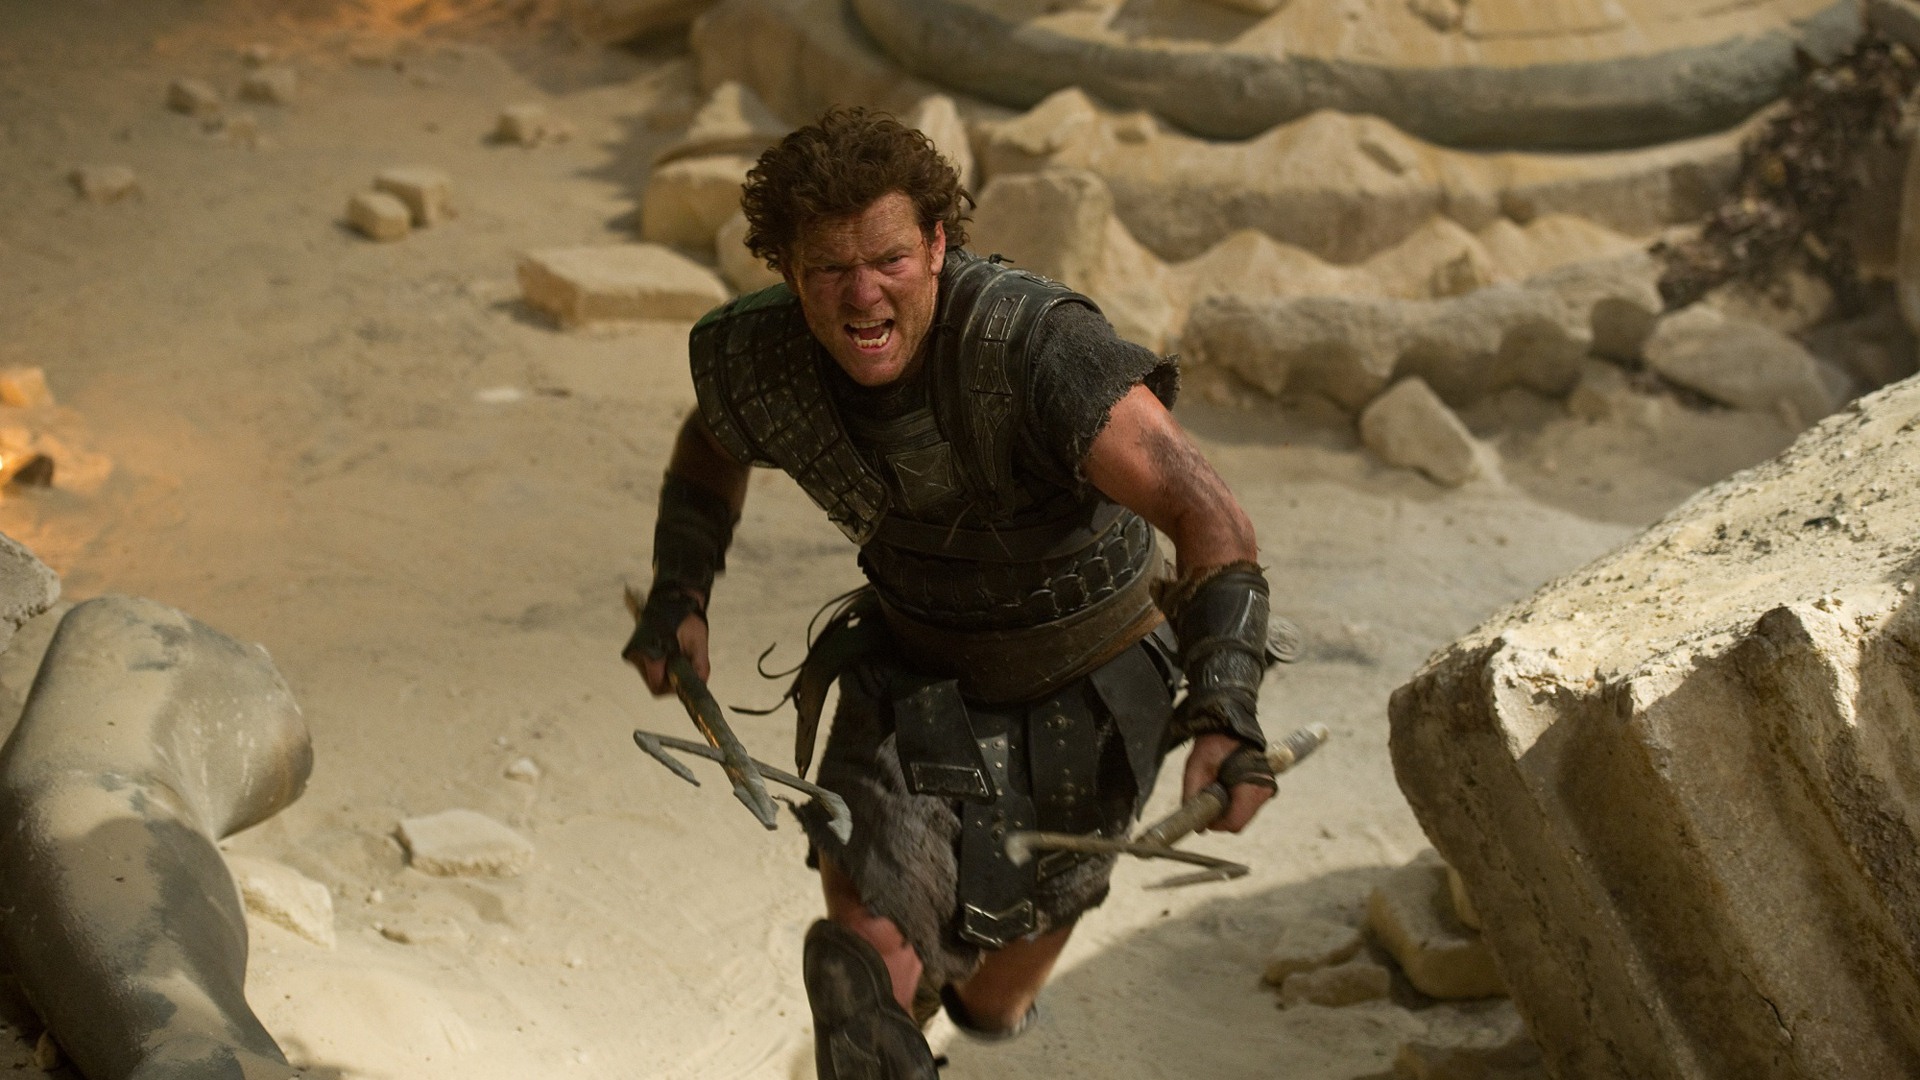 Wrath of the Titans HD wallpapers #13 - 1920x1080